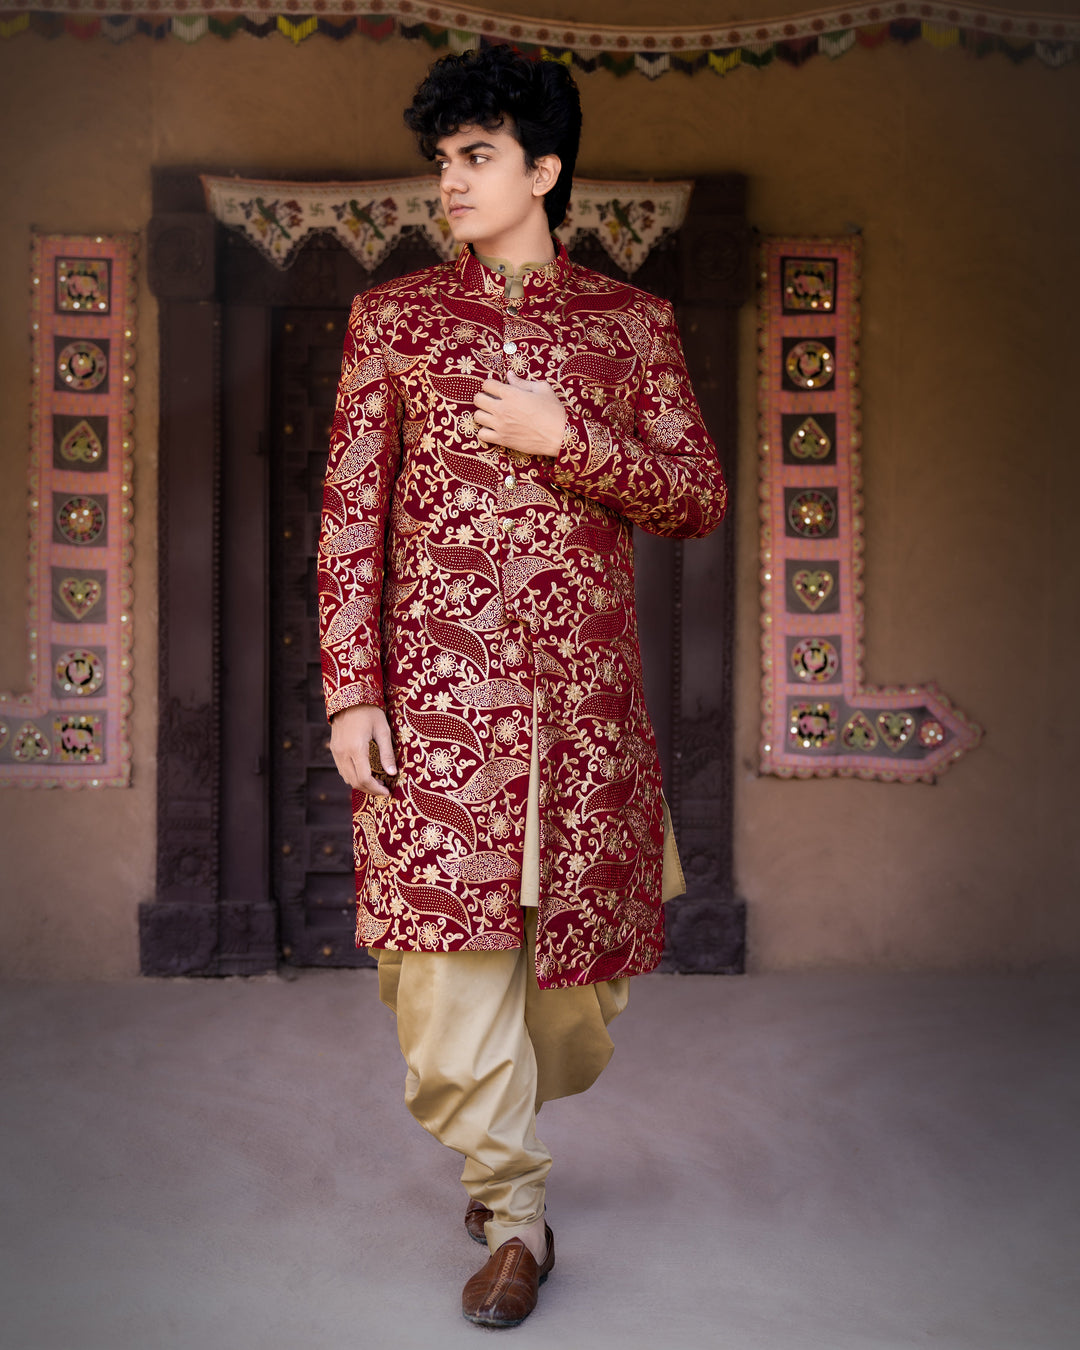 8 Ethnic Wear Ideas for Men to Rock All Occasions